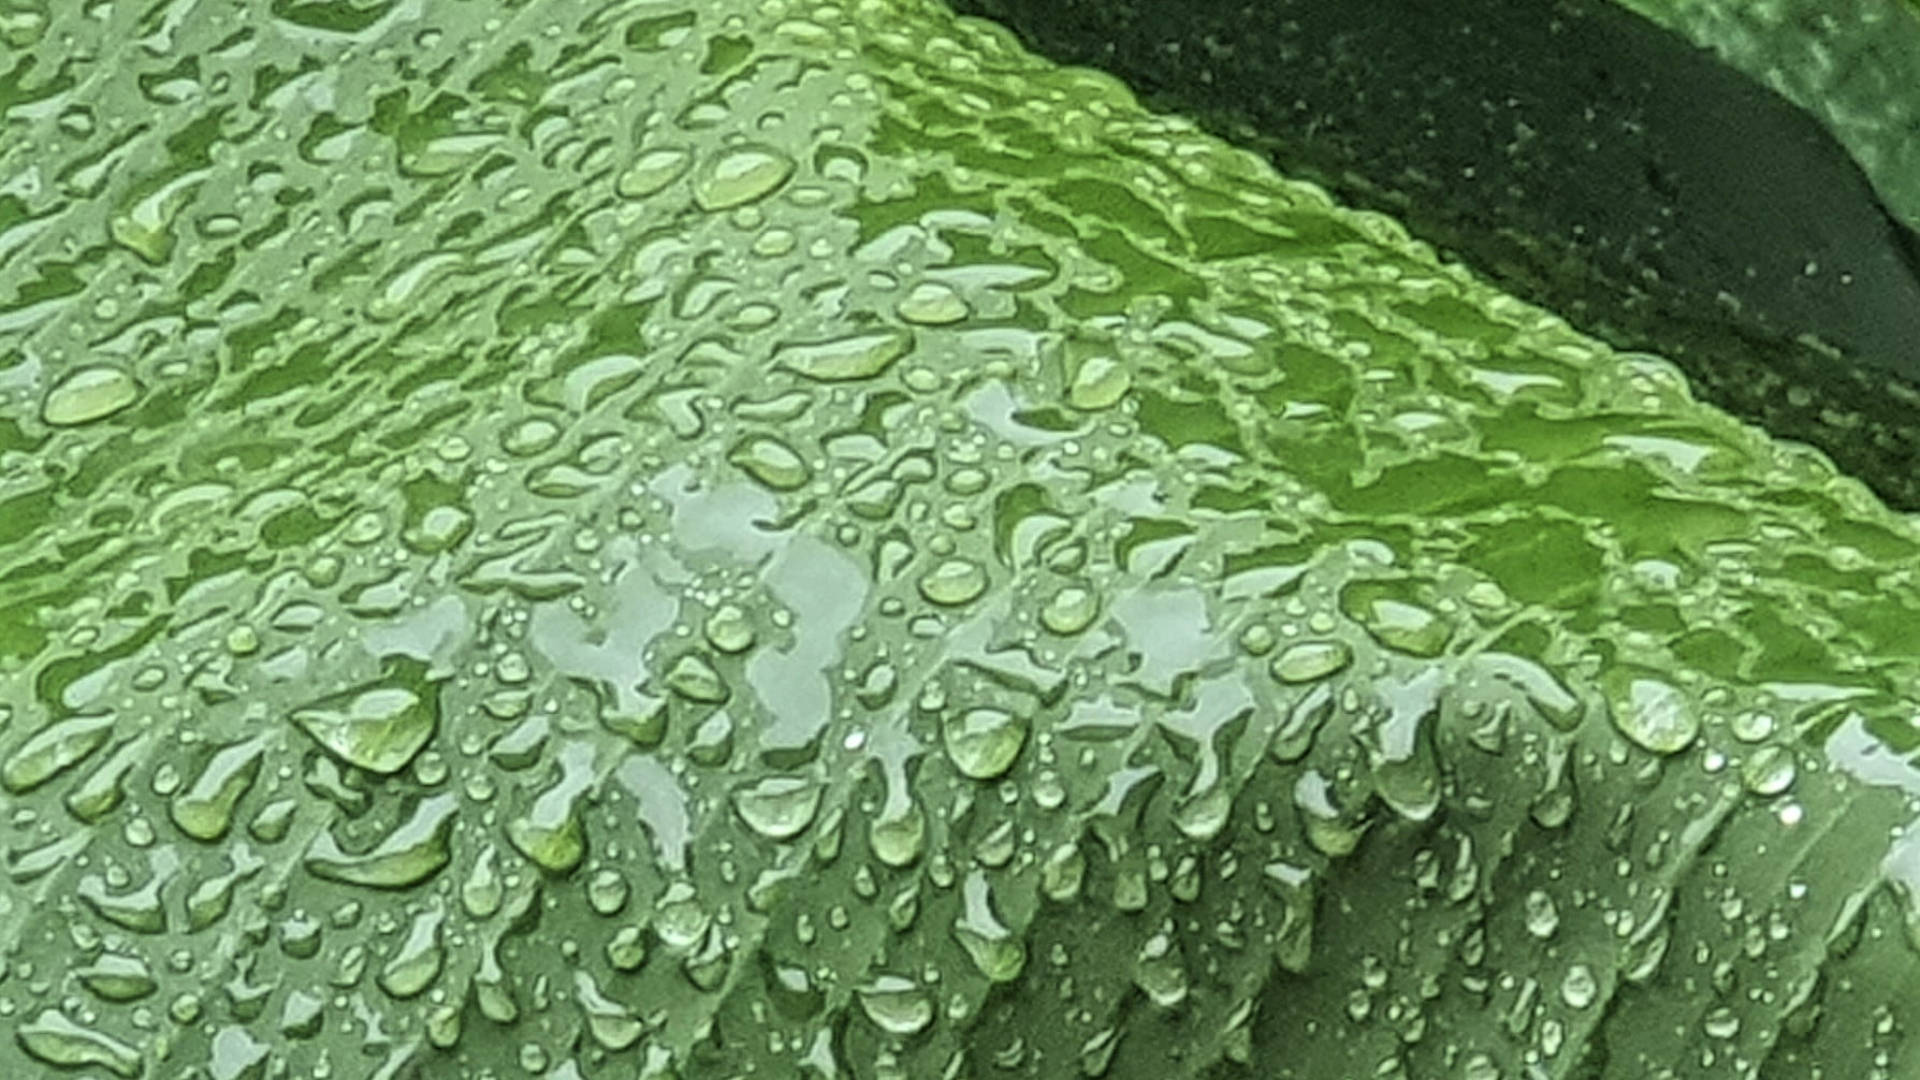 Banana Leaf With Water Droplets